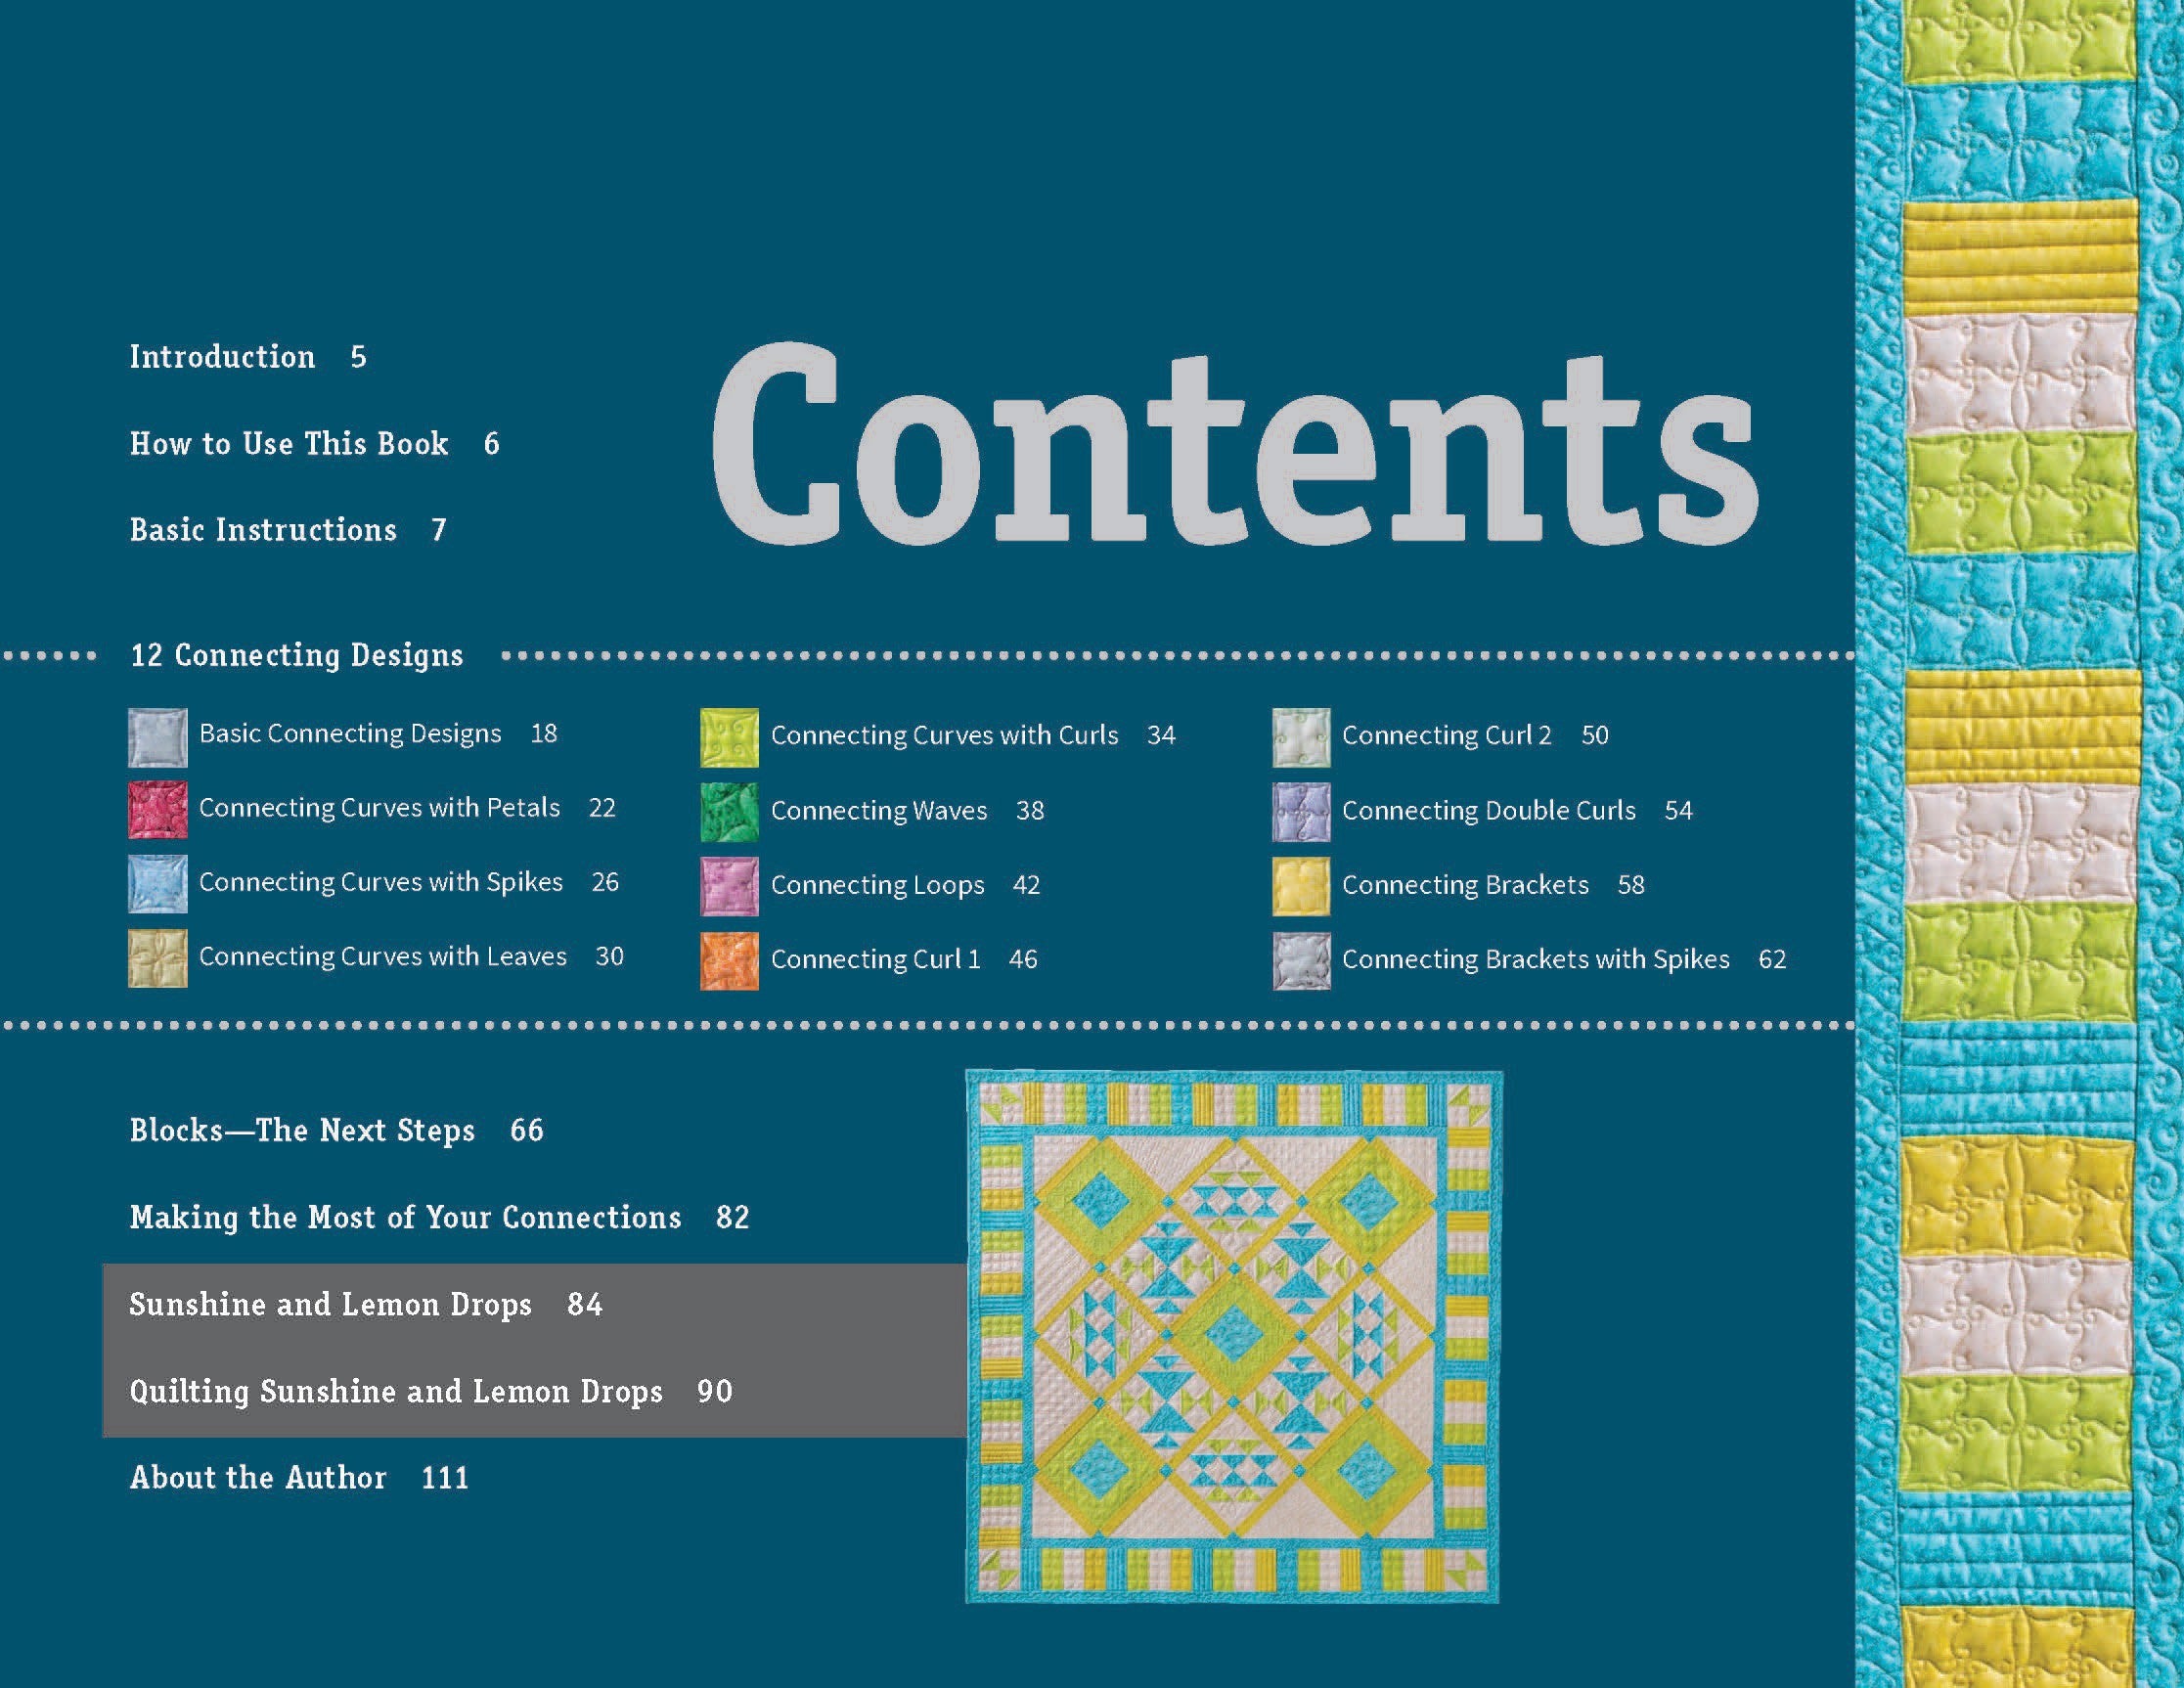 Making Connections A Free-Motion Quilting Workbook by Dorie Hruska for C&T Publishing